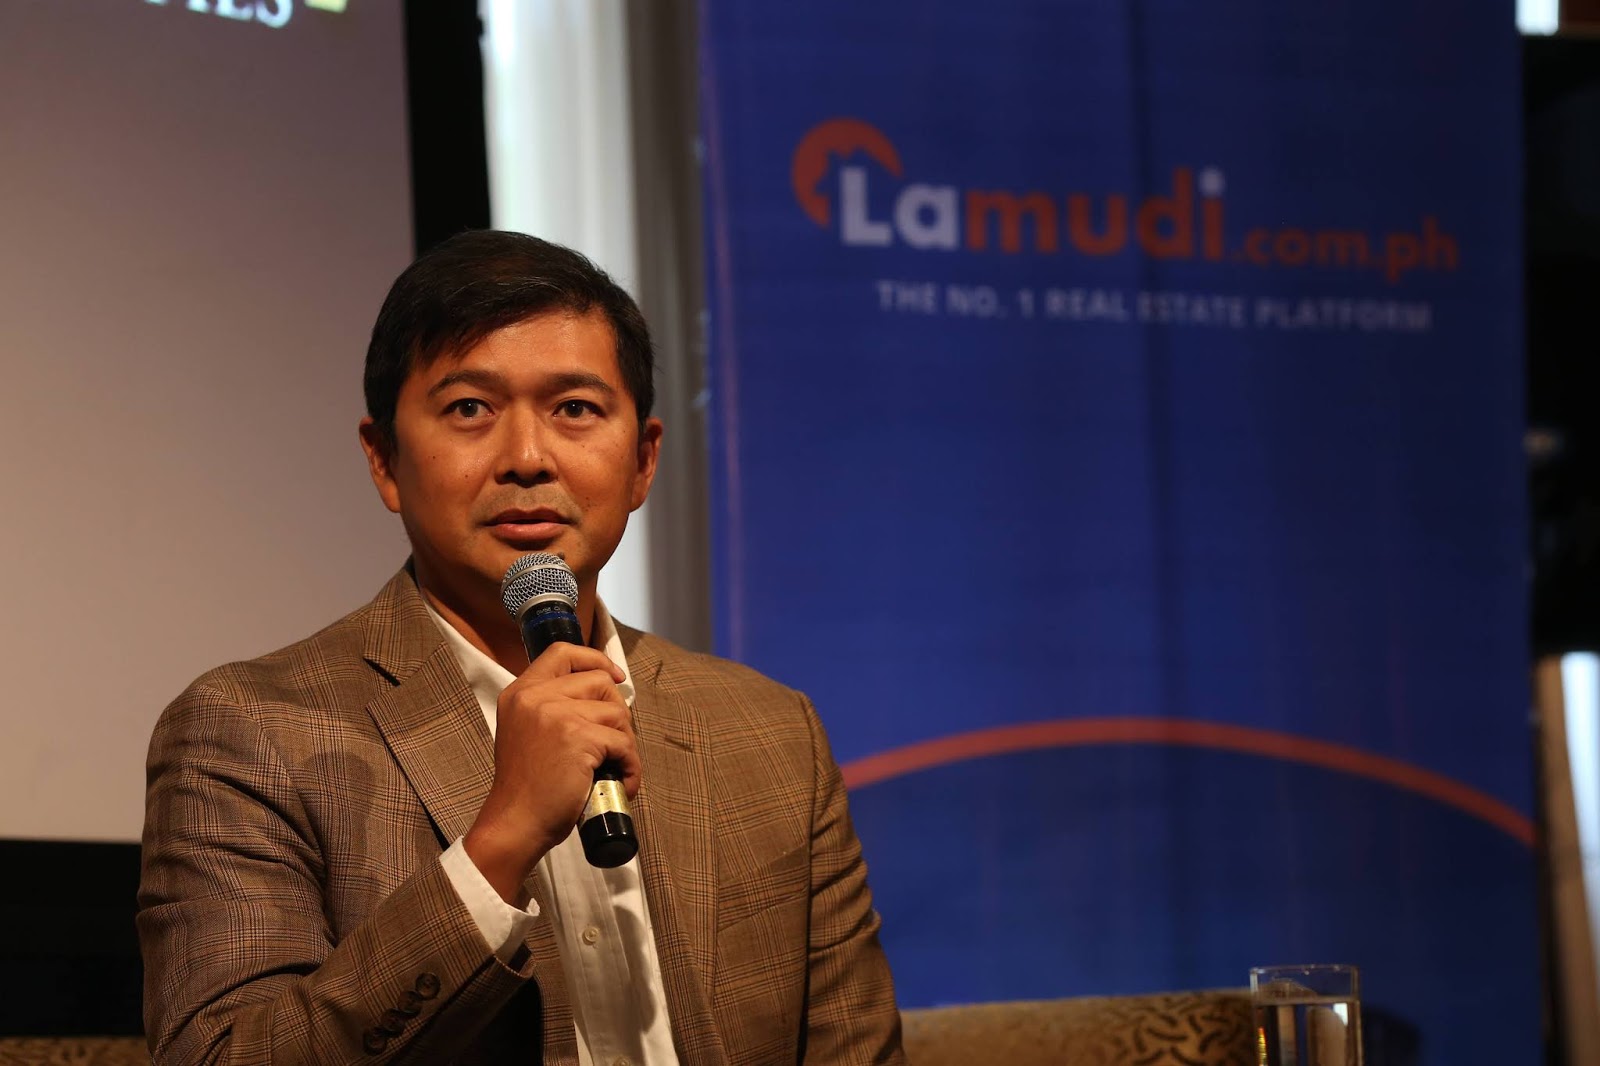 |Business| Lamudi's Outlook 2019: Building Resilient and Sustainable Cities